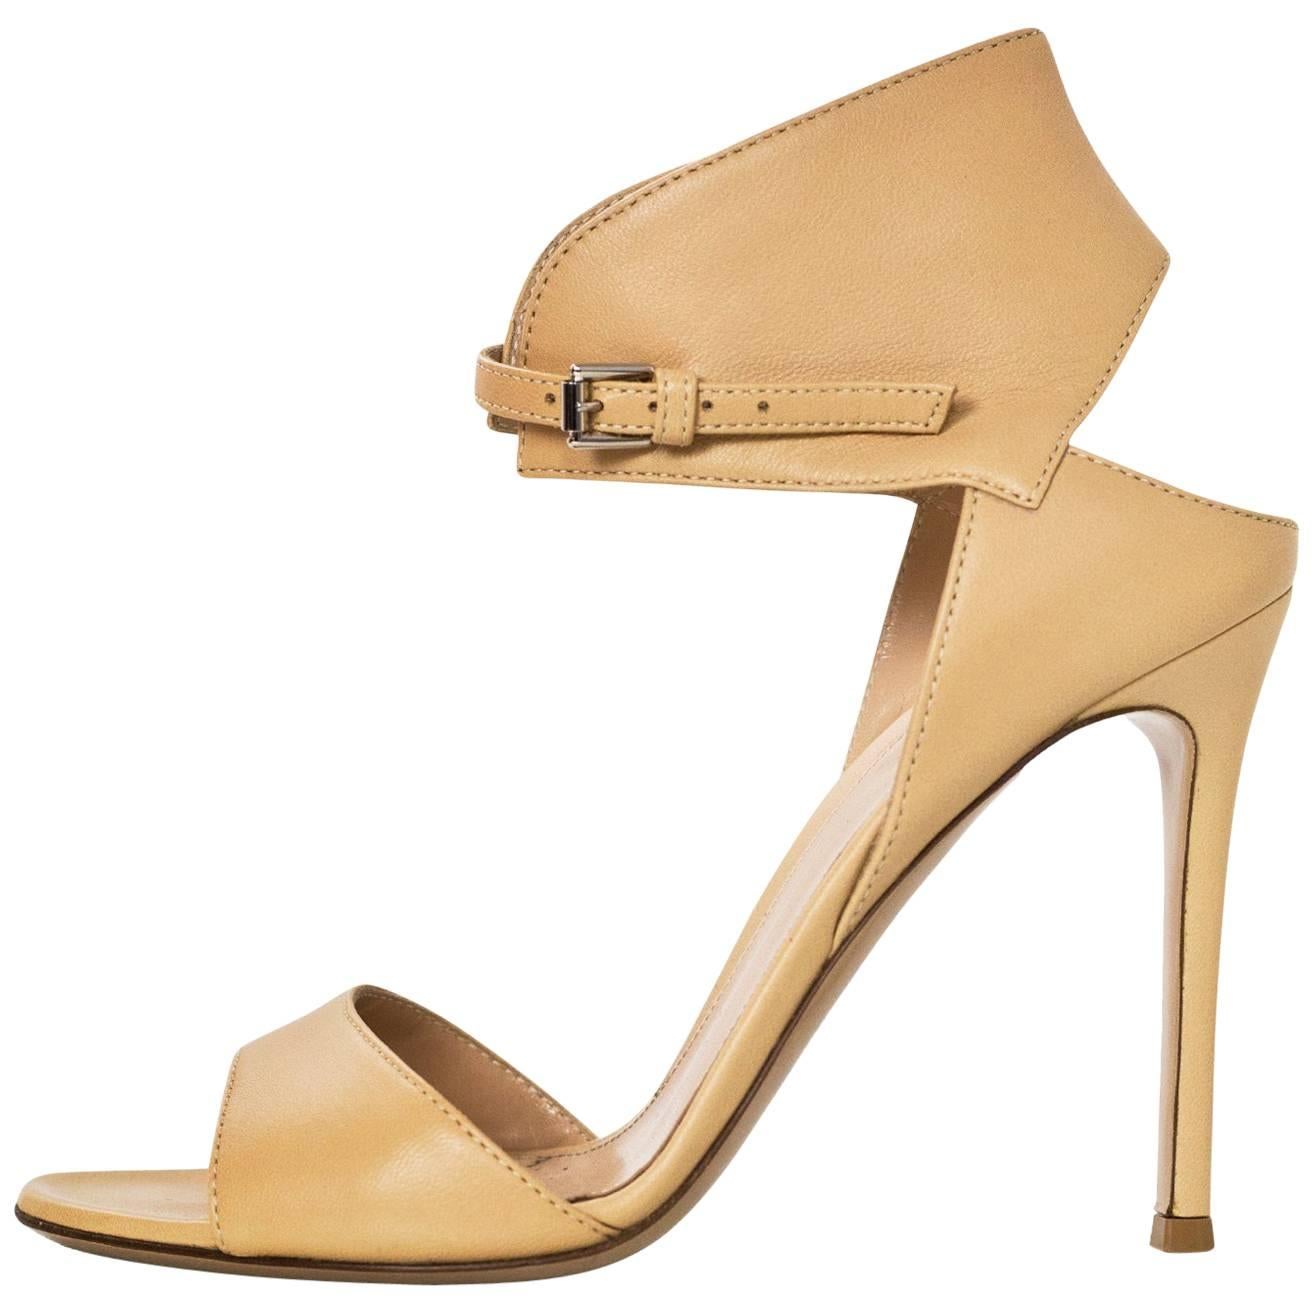 Gianvito Rossi Beige Leather Ankle Strap Sandals Sz 36.5